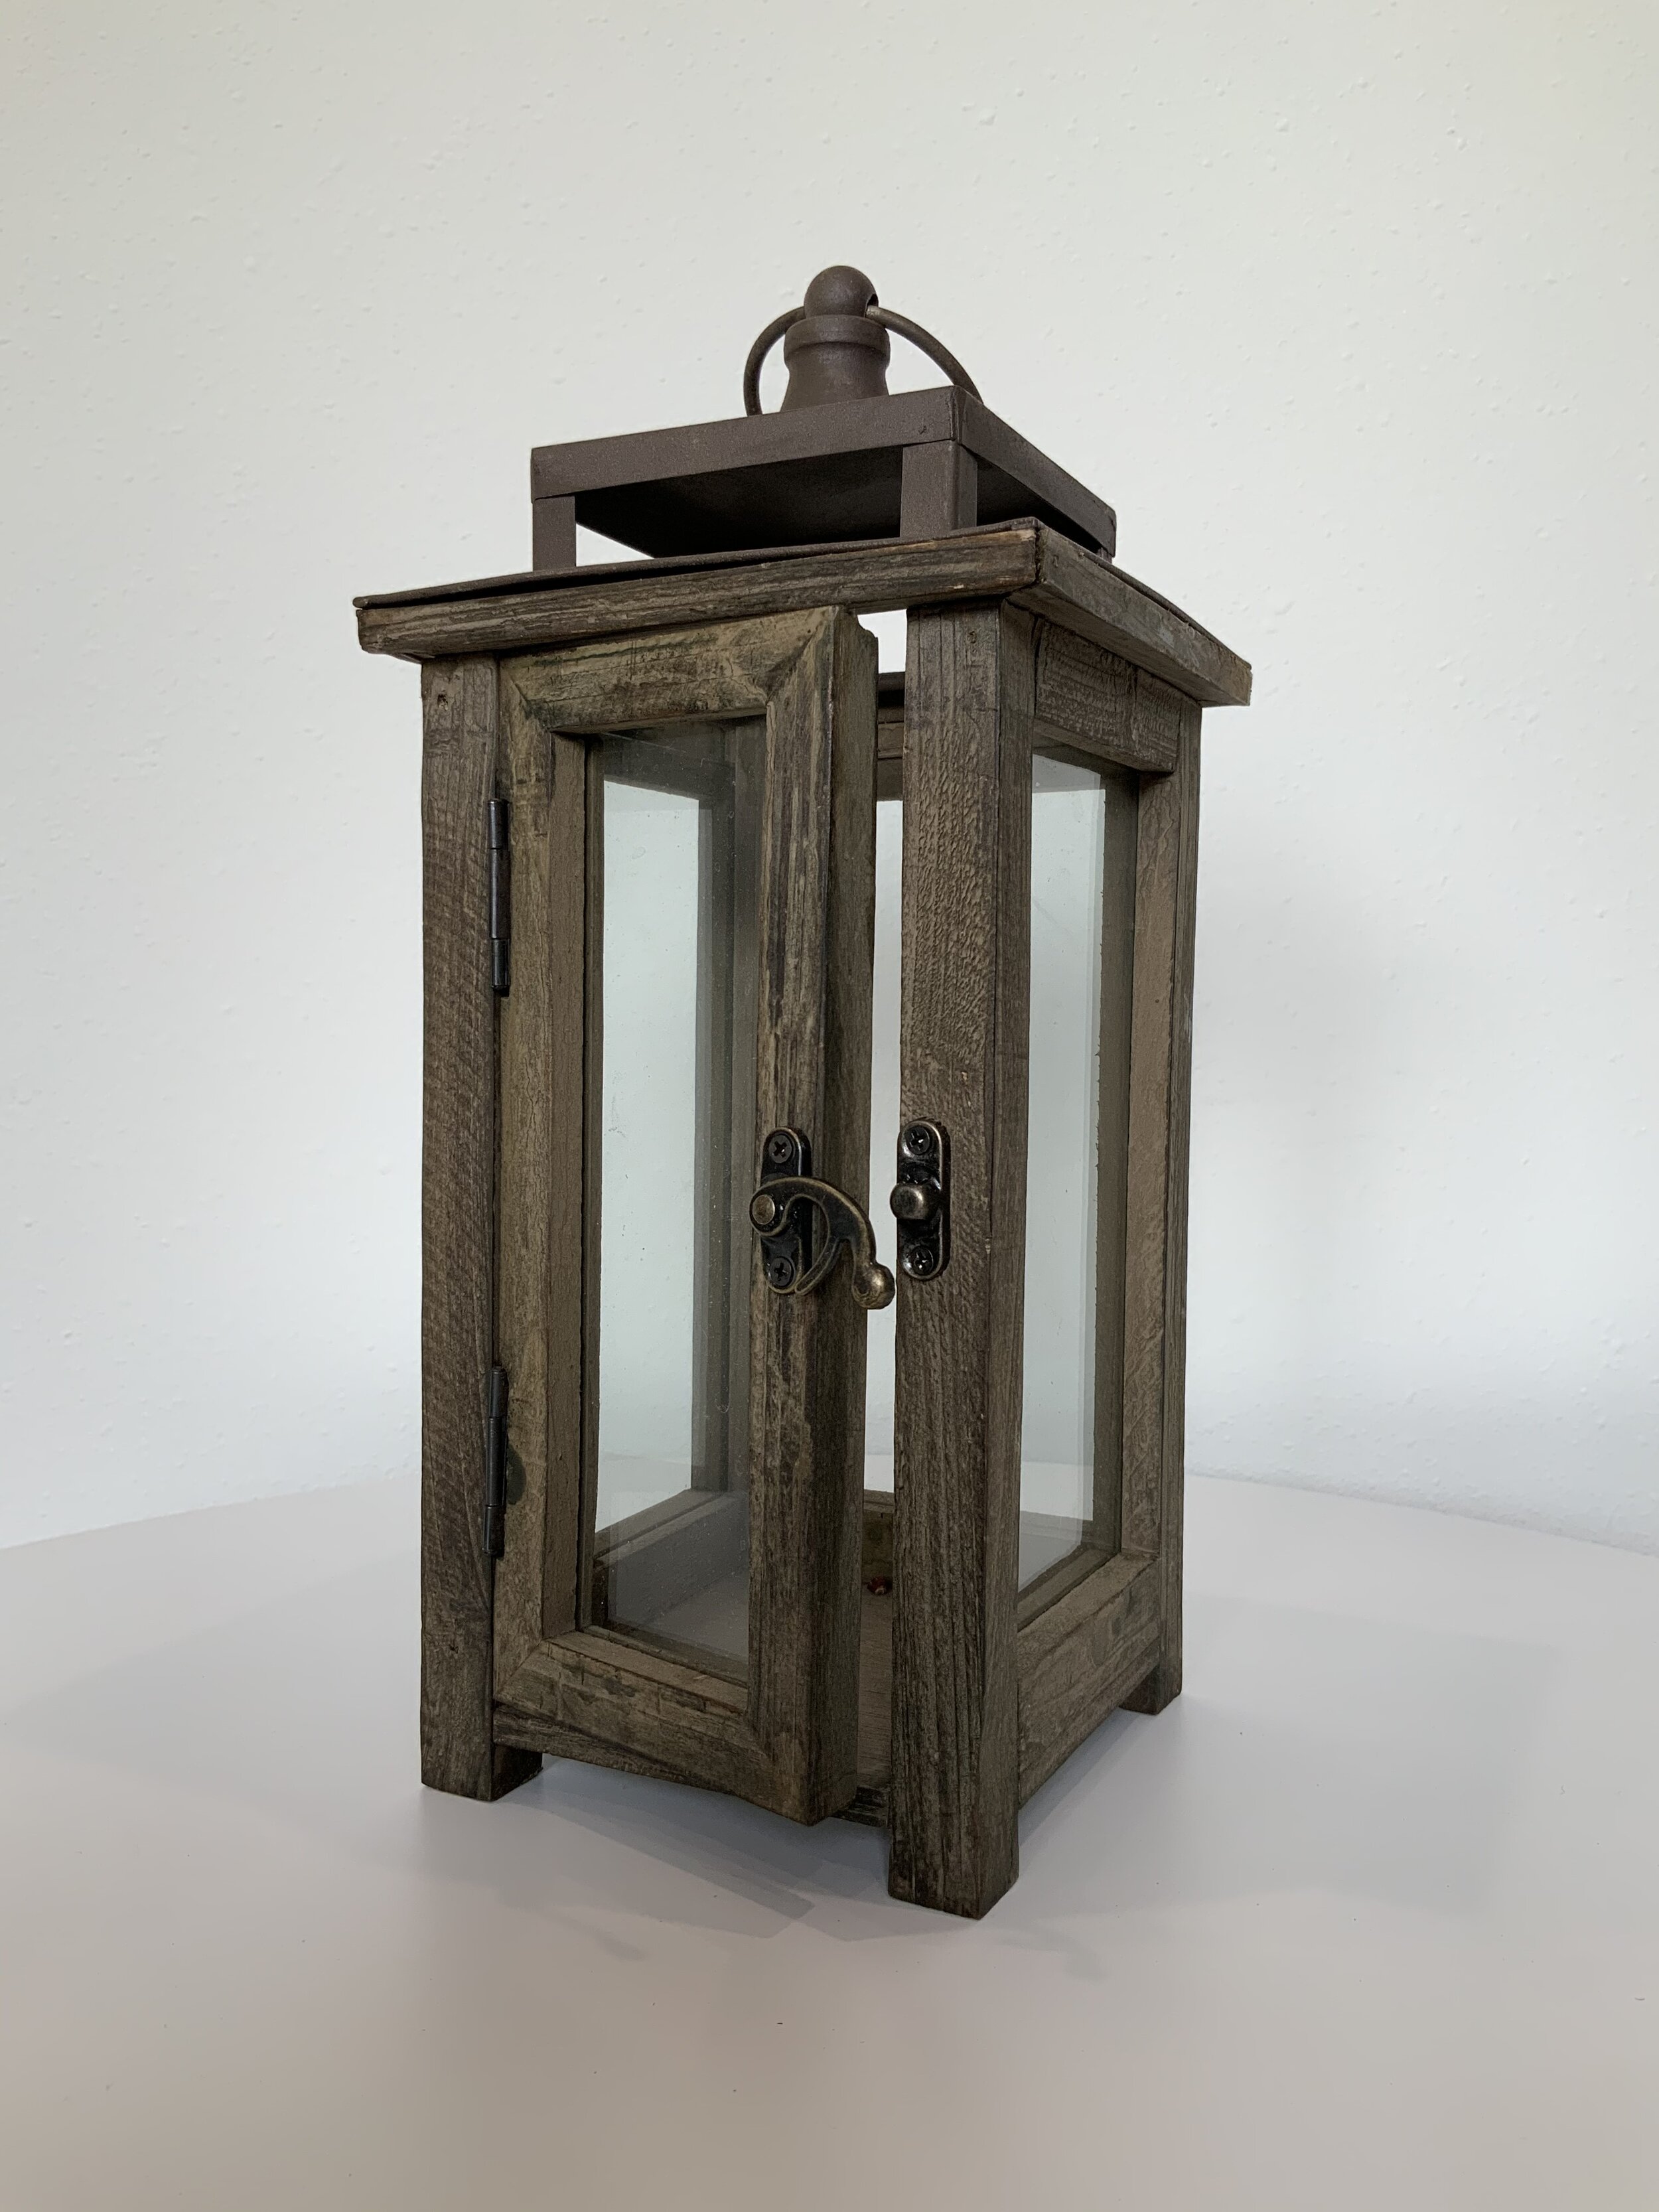 12" Wood lantern (15) -$10 ($15 with candle)